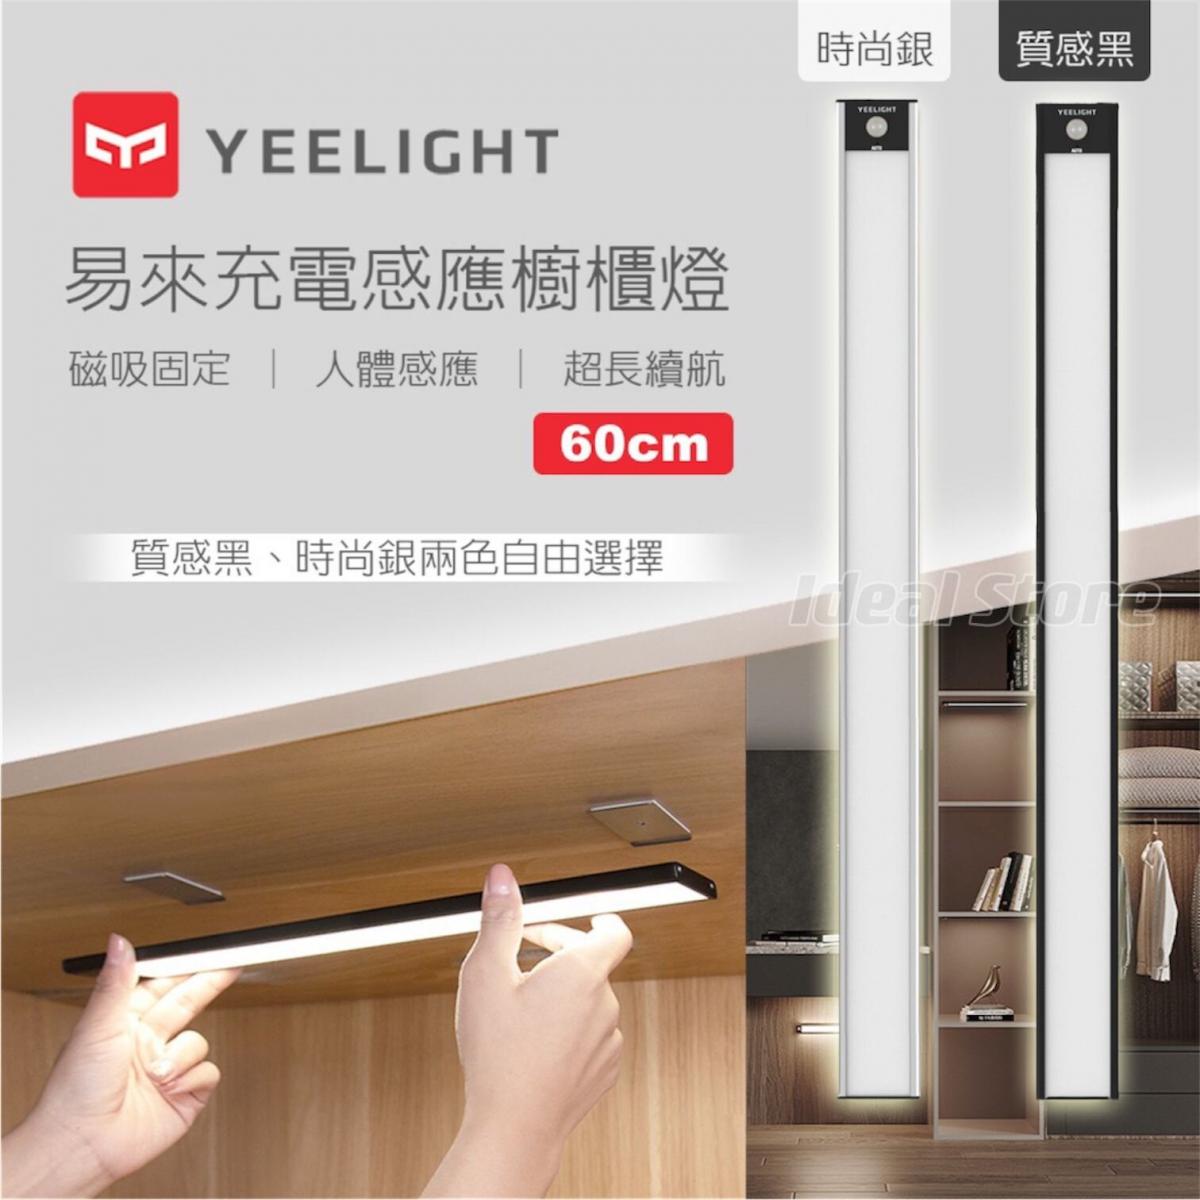 YEELIGHT - Yilai rechargeable induction cabinet light 60cm A60 (Global Version) | Magnetic light | Auto shut off | LED light strip | Wireless YLBGD-0046